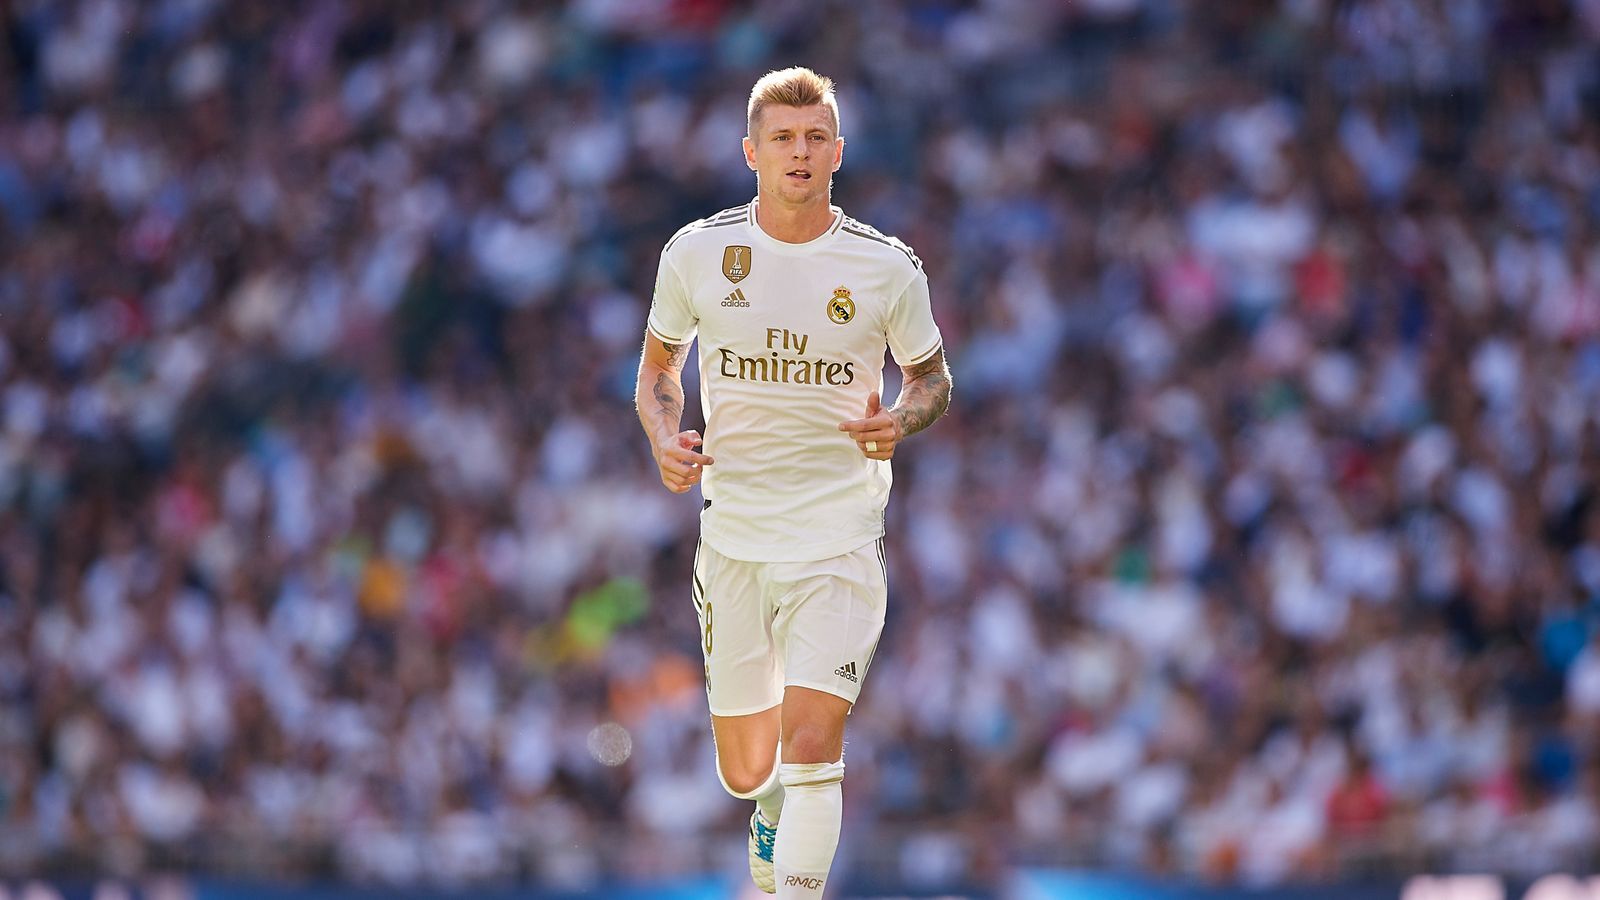 Kroos: I Don’t Know If I’d Advise an Active Footballer to Come Out as Gay